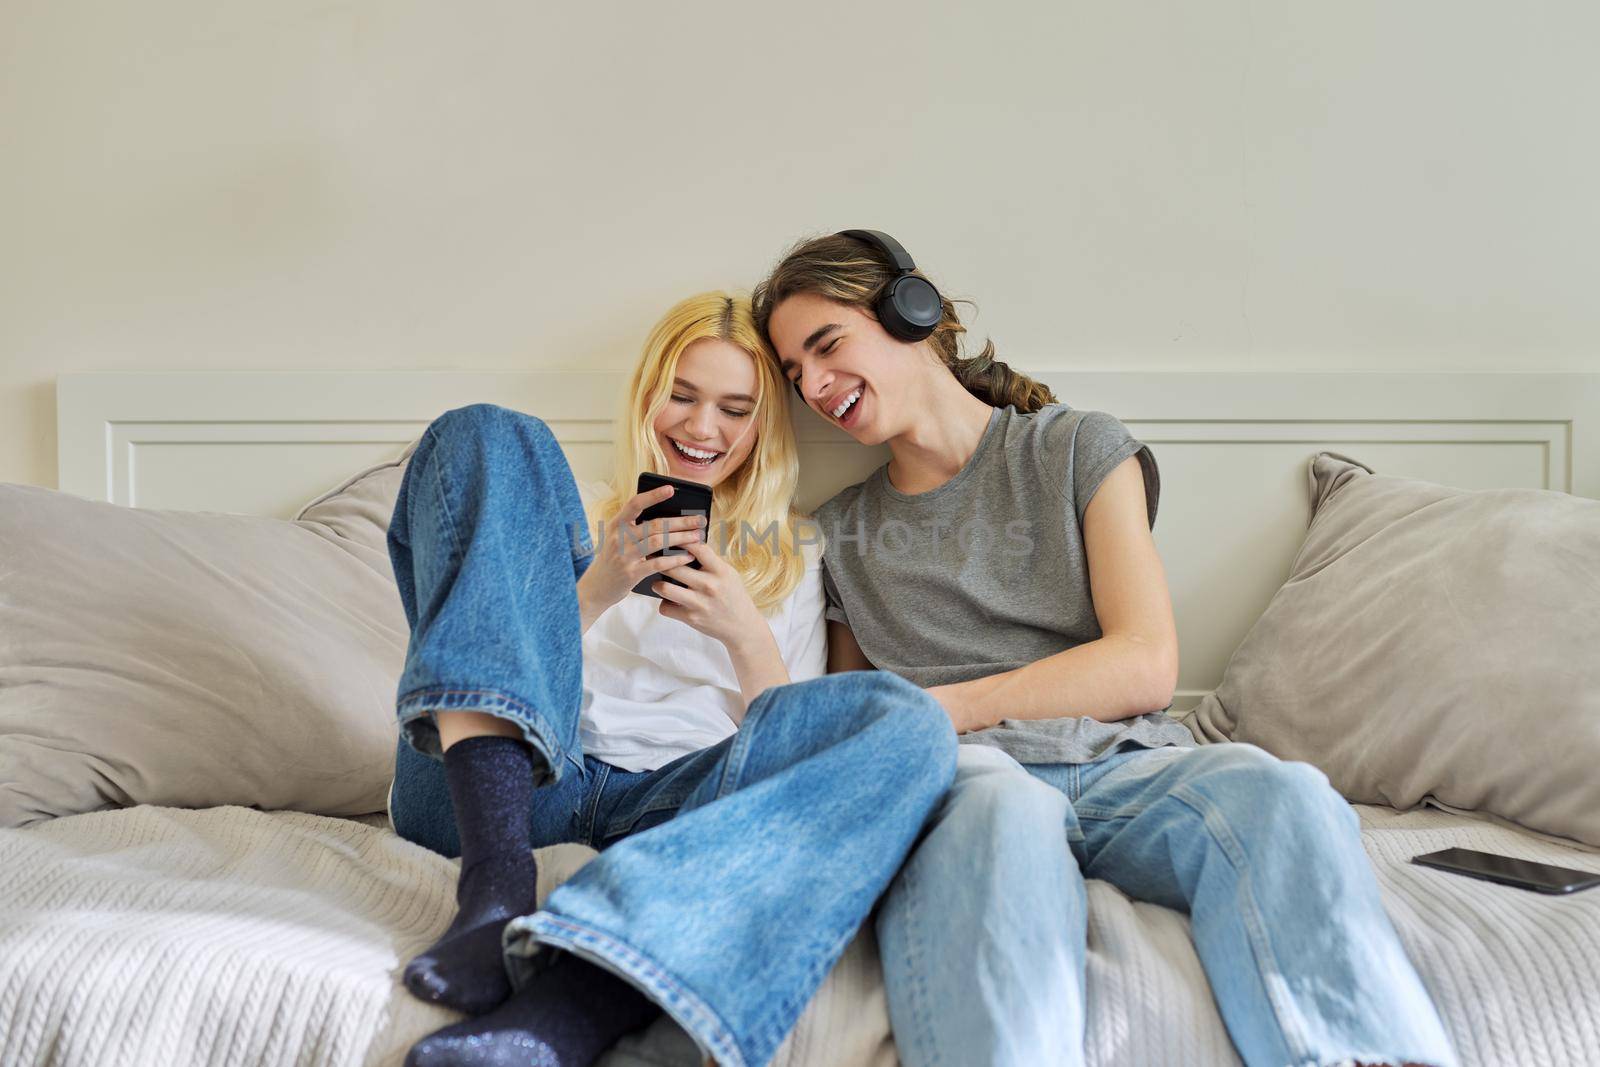 Happy laughing hipster teenagers male and female having fun using smartphone together by VH-studio